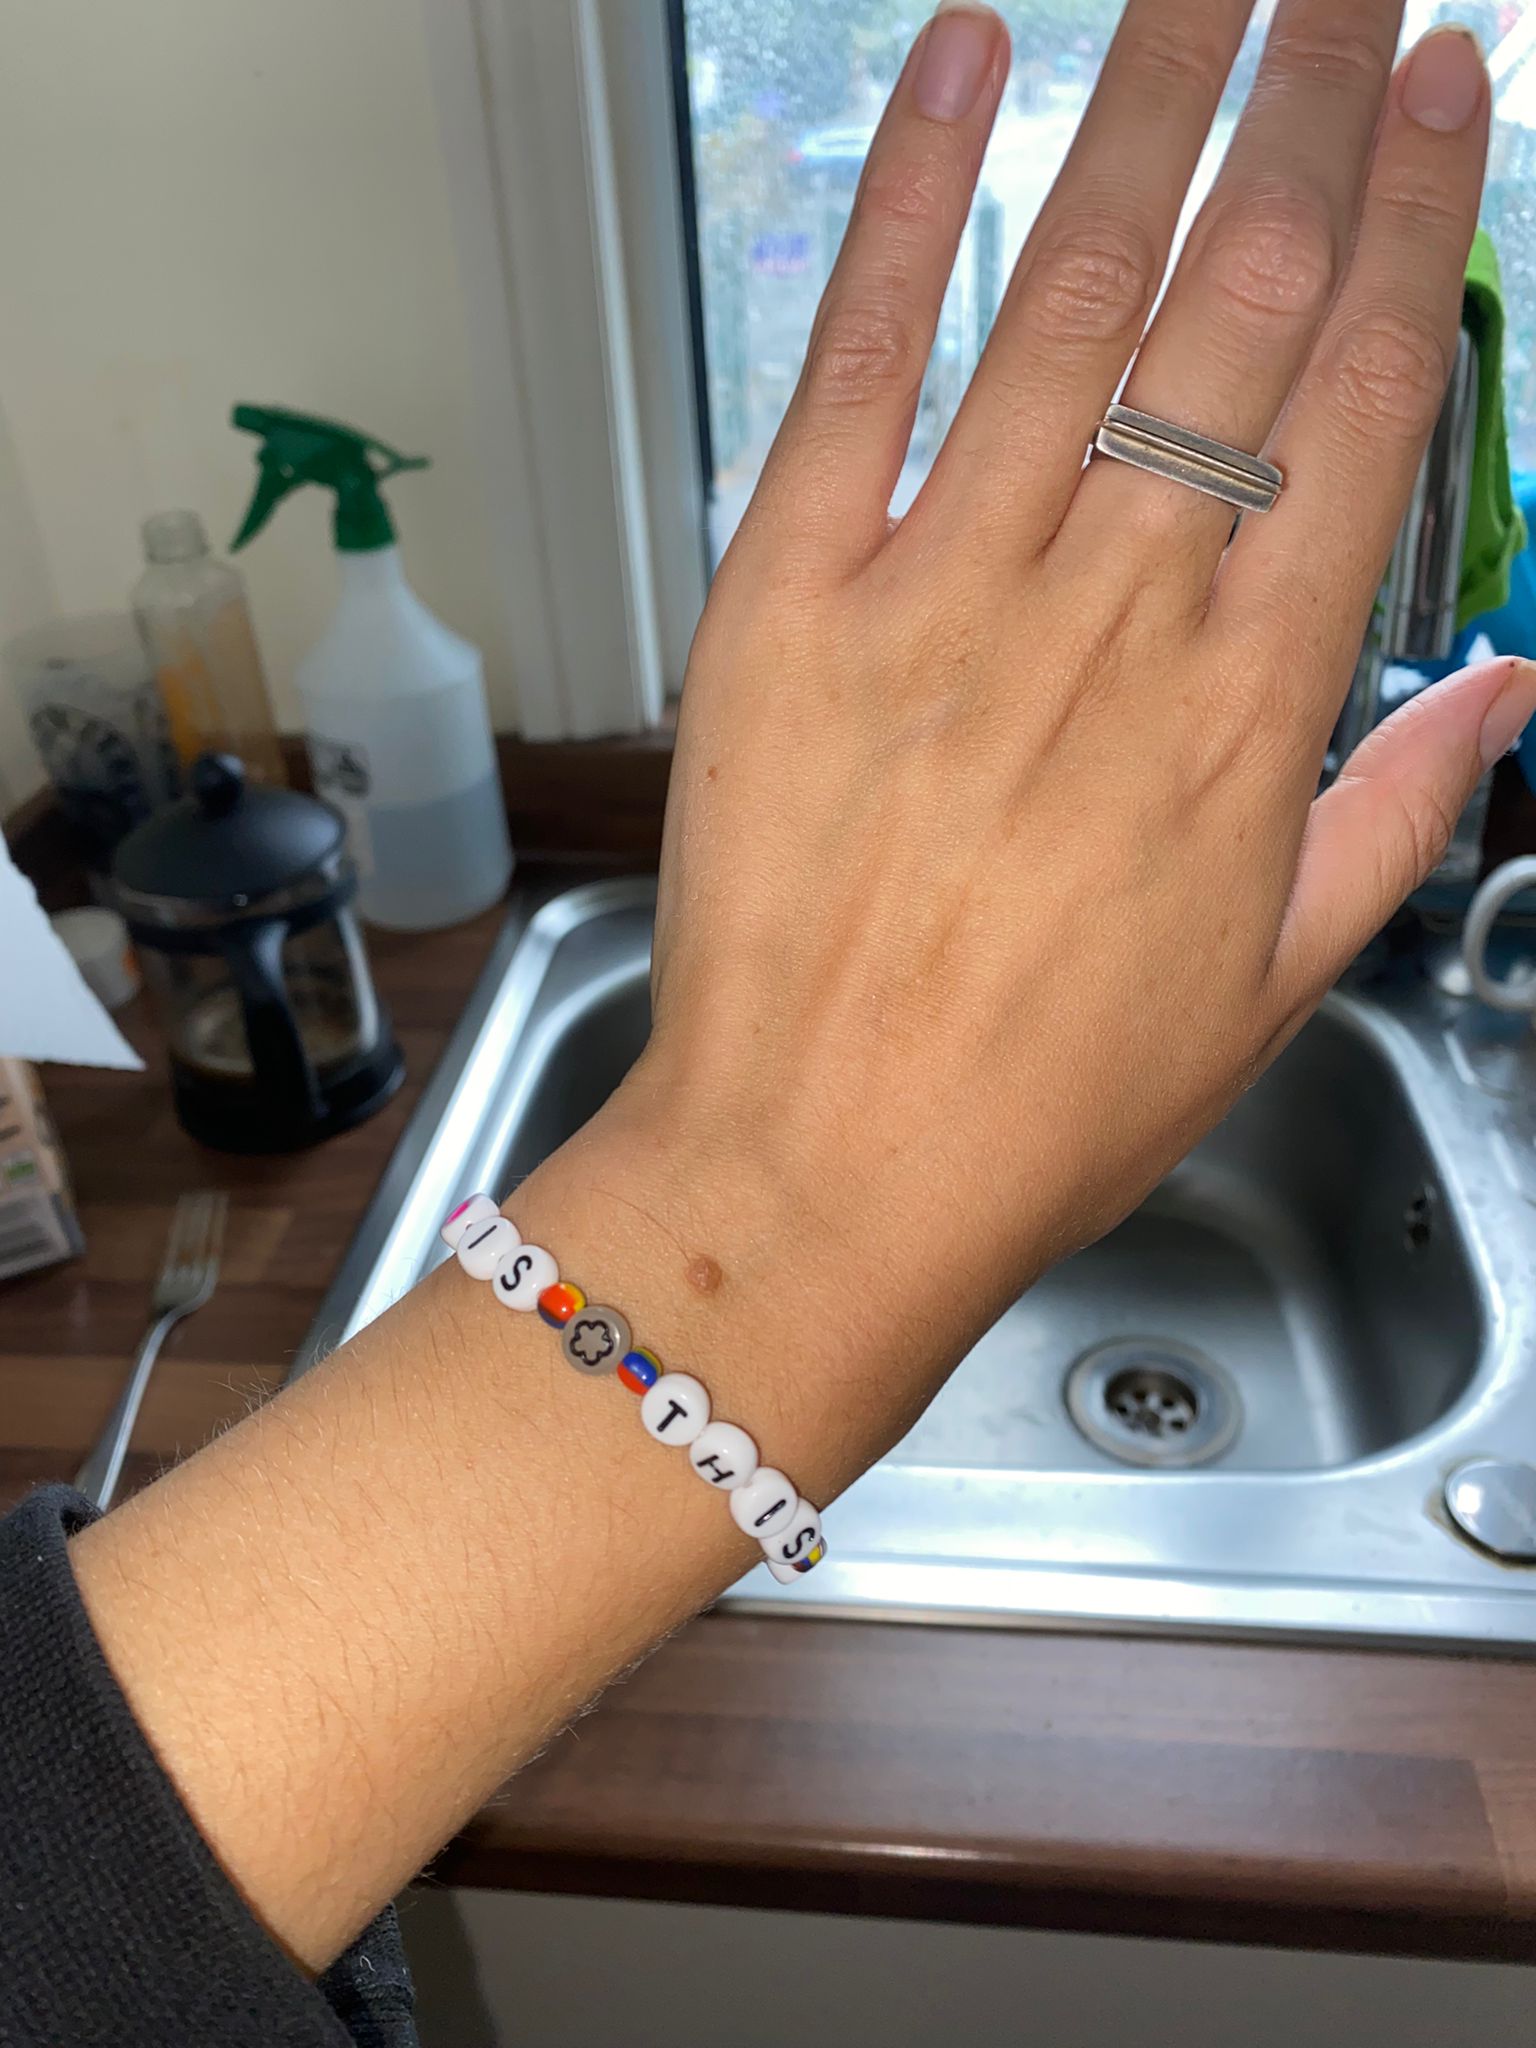 Is This It bracelet being modelled on a hand next to a sink